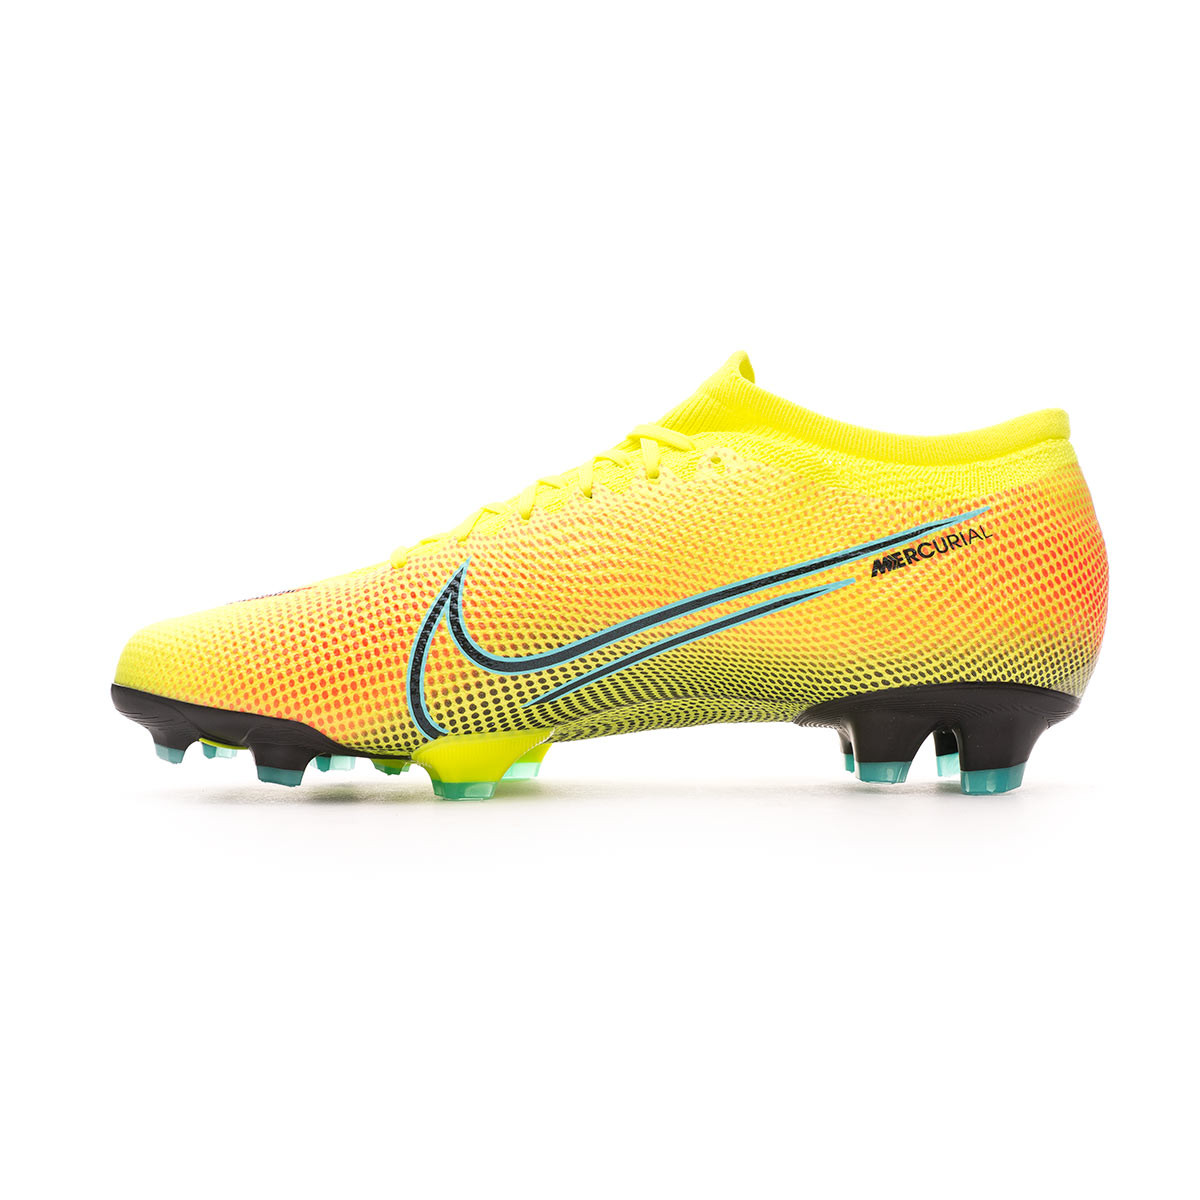 NIKE MERCURIAL VAPOR 13 OUT OF THIS WORLD.